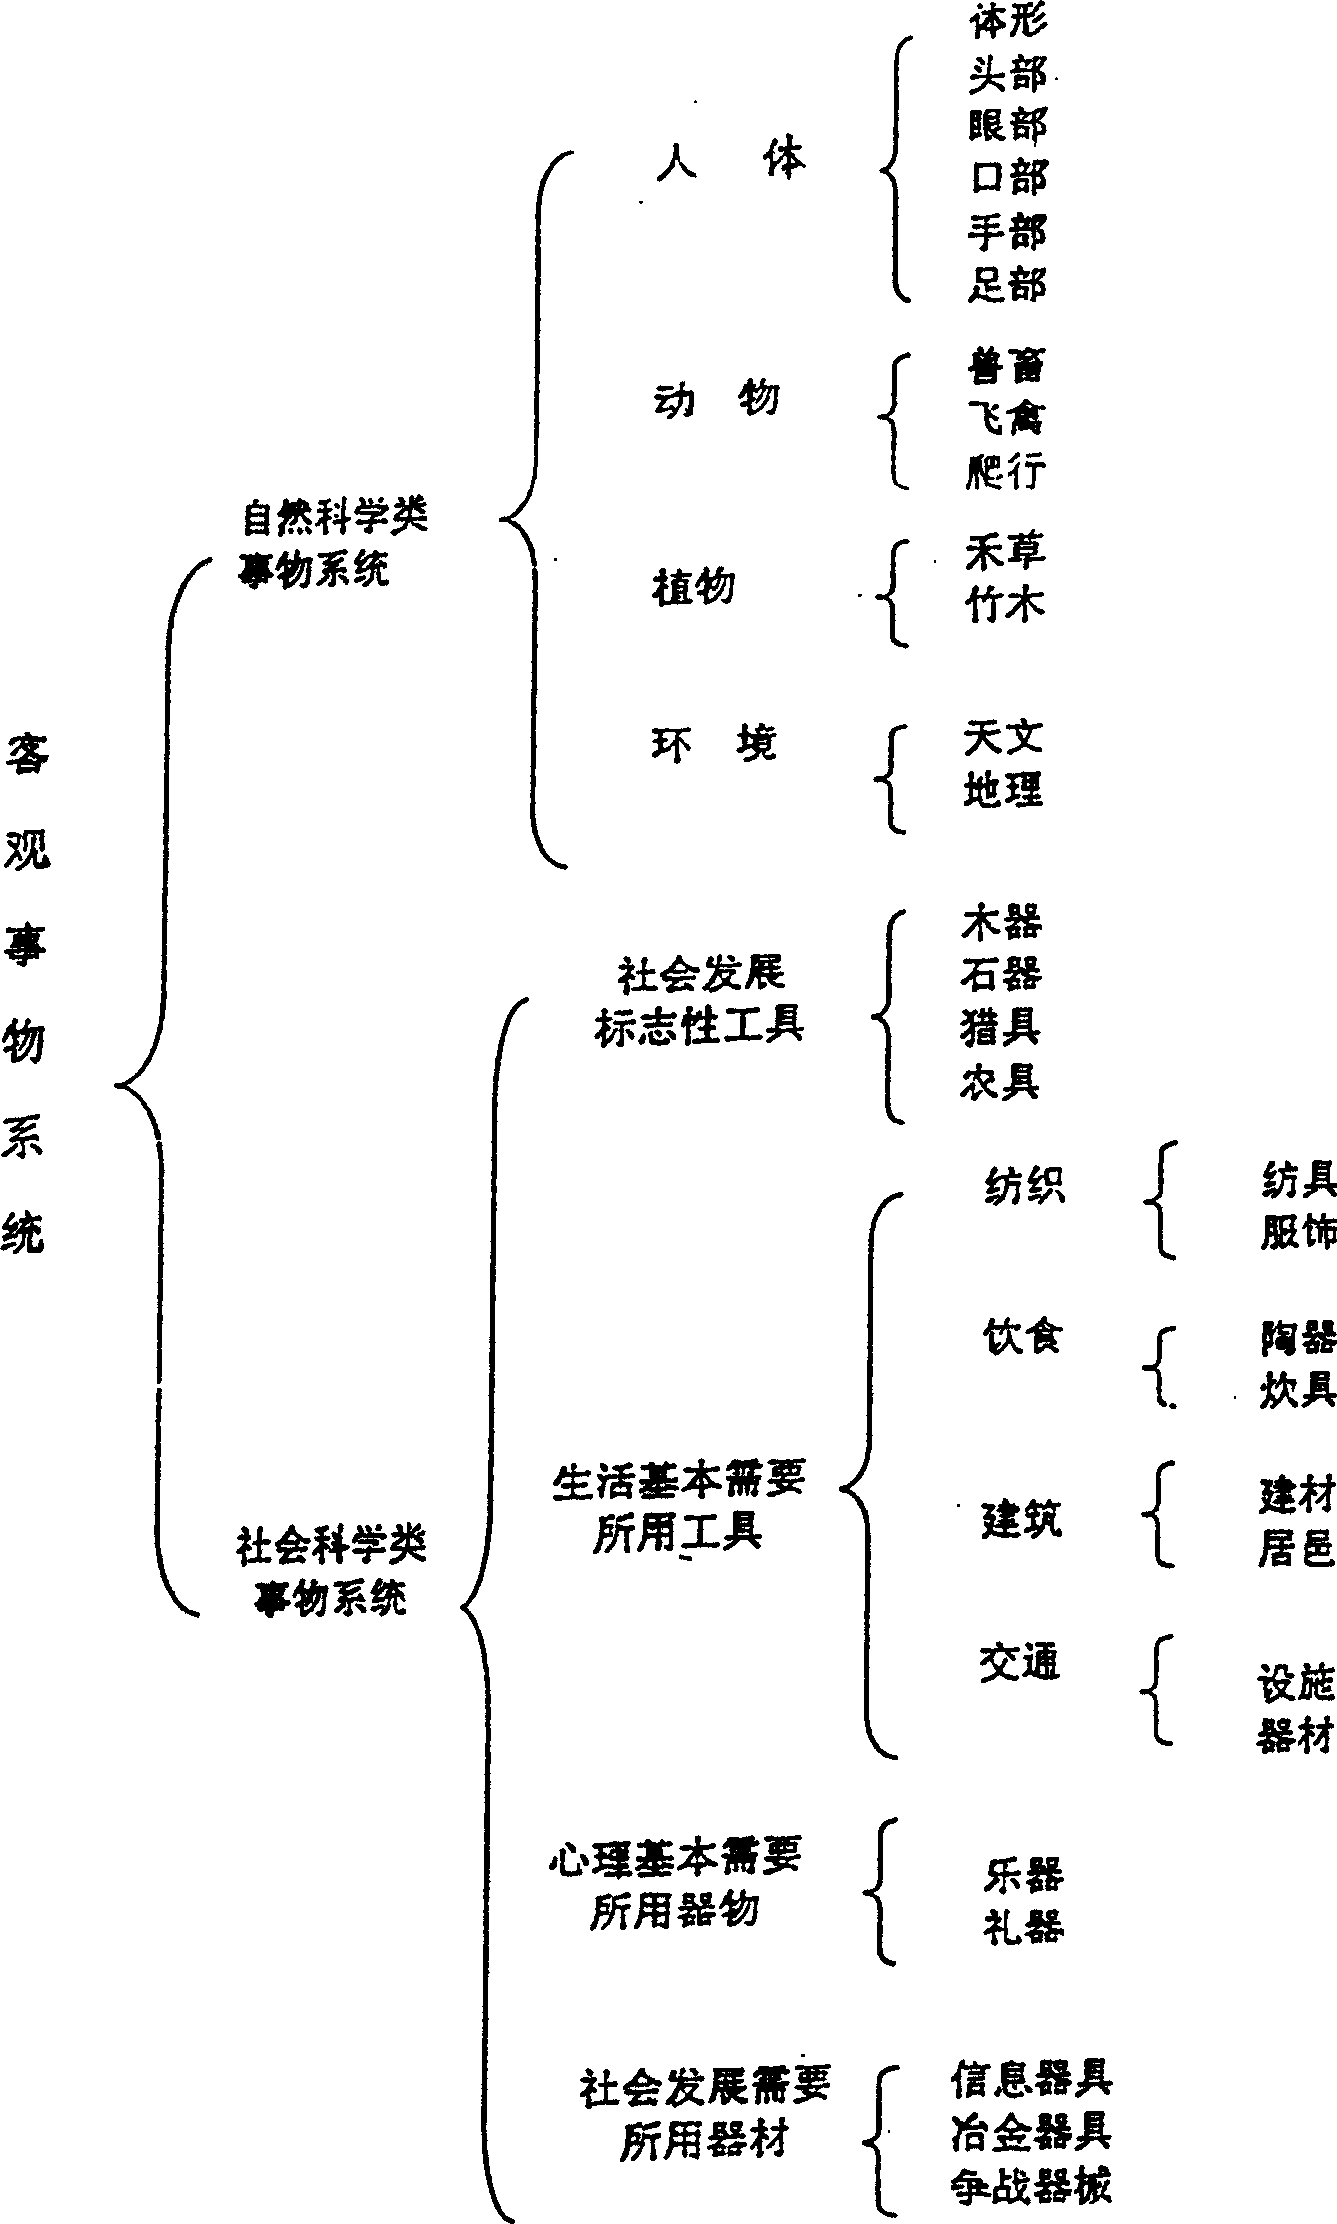 Method for arranging original codes of Chinese information